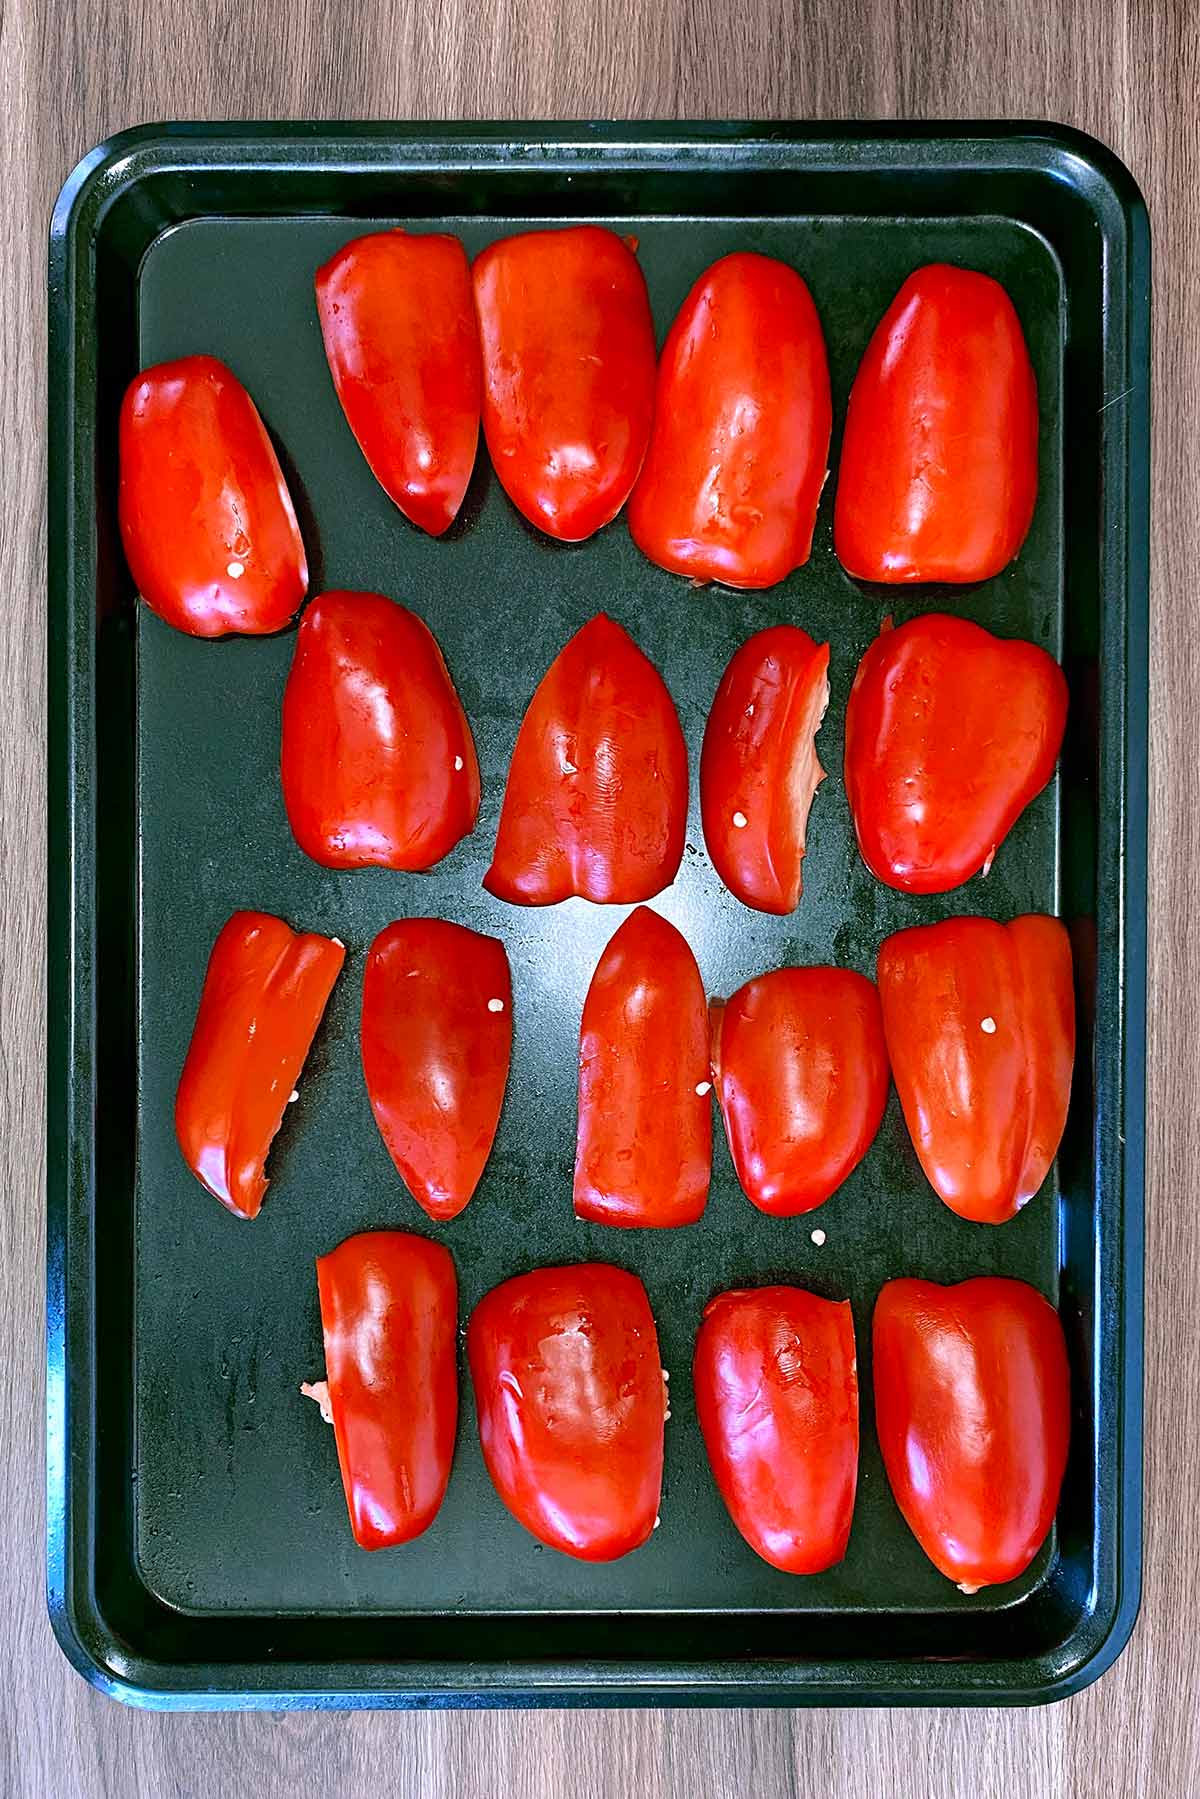 Red pepper quarters on a baking tray.